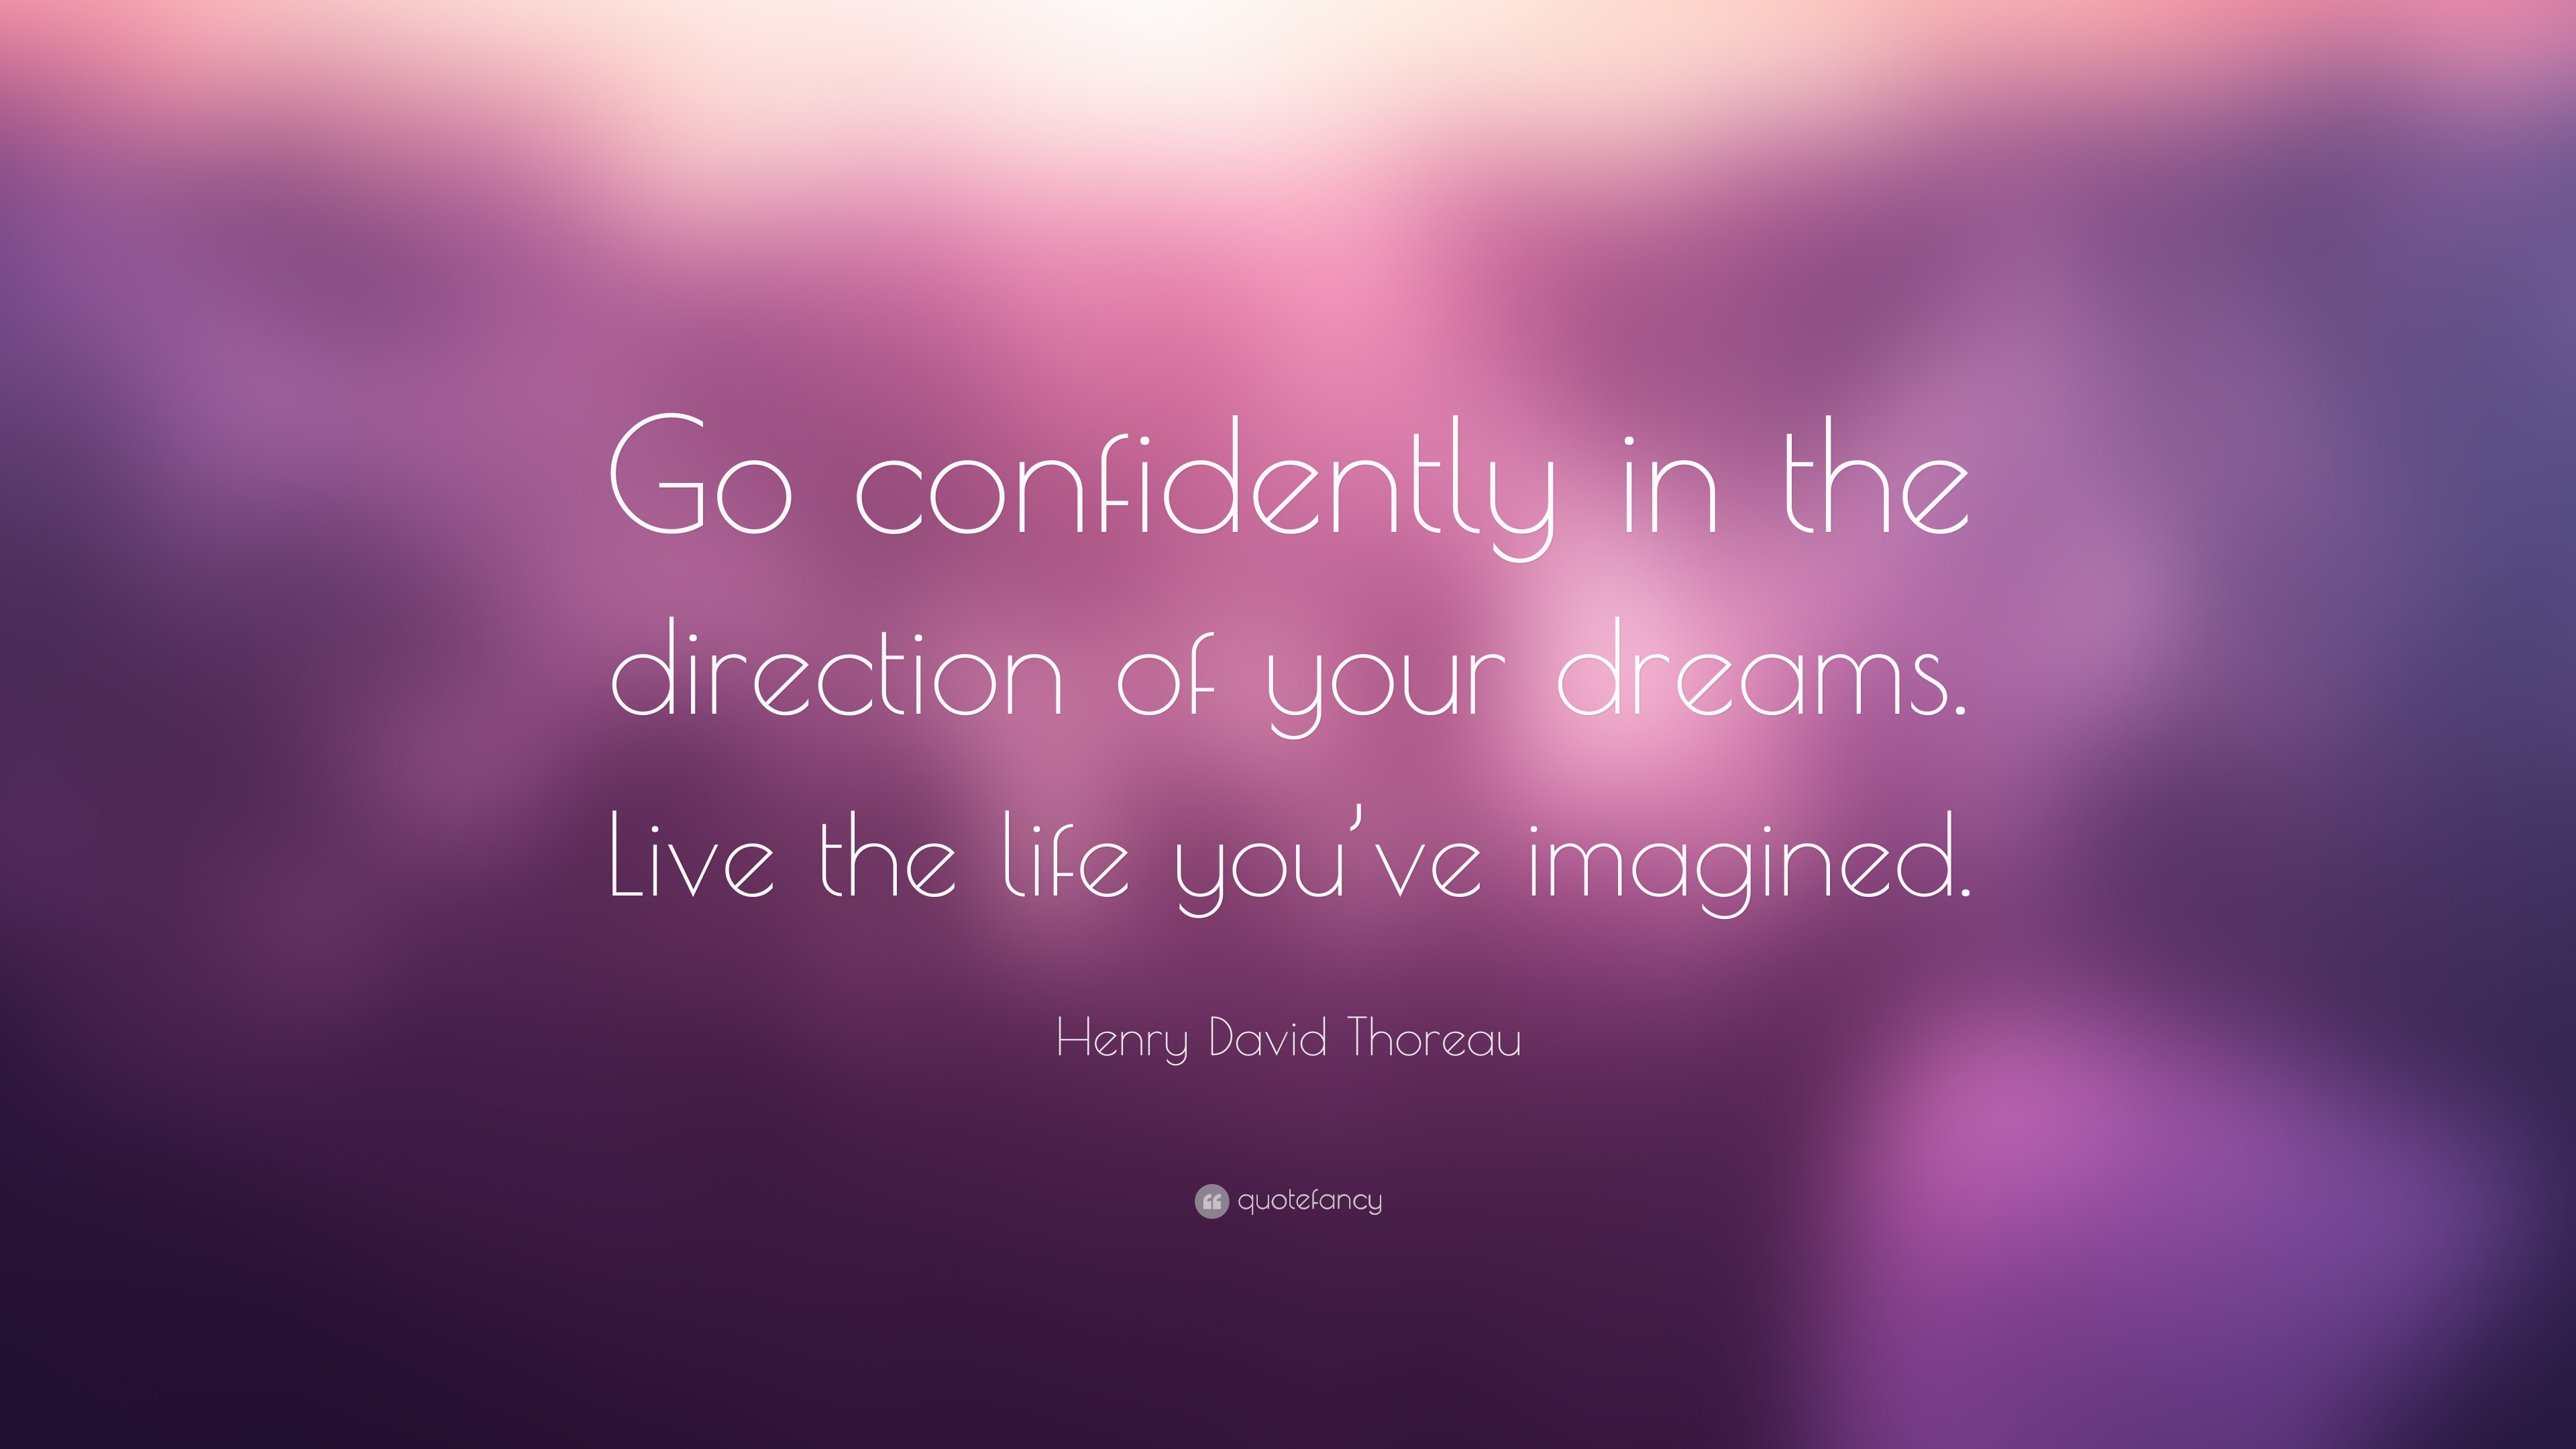 Henry David Thoreau Quote “Go confidently in the direction of your dreams Live